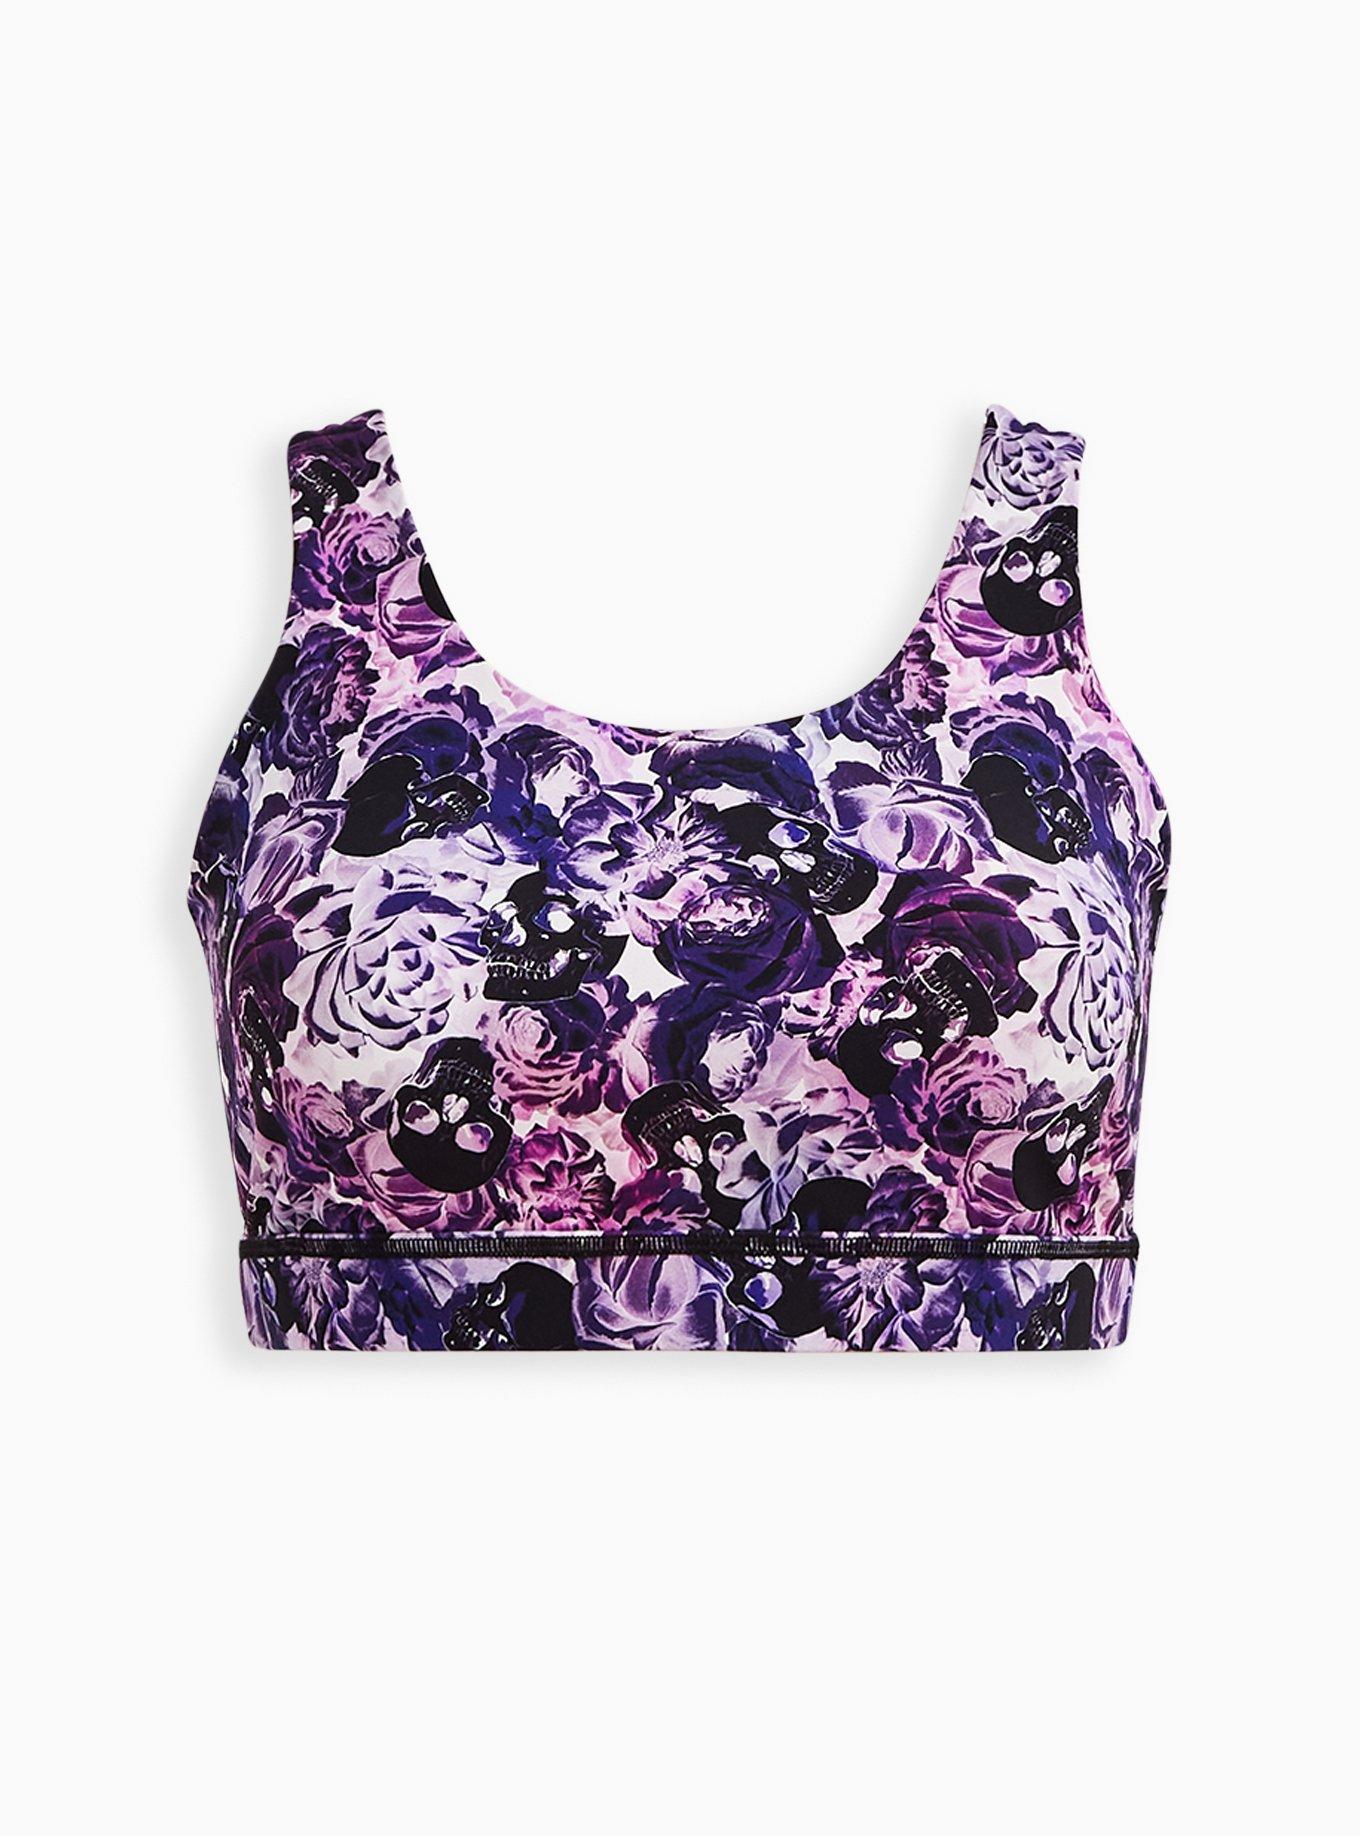 Animal Print No Bounce Sports Bra NWT  Things that bounce, Clothes design,  Fashion